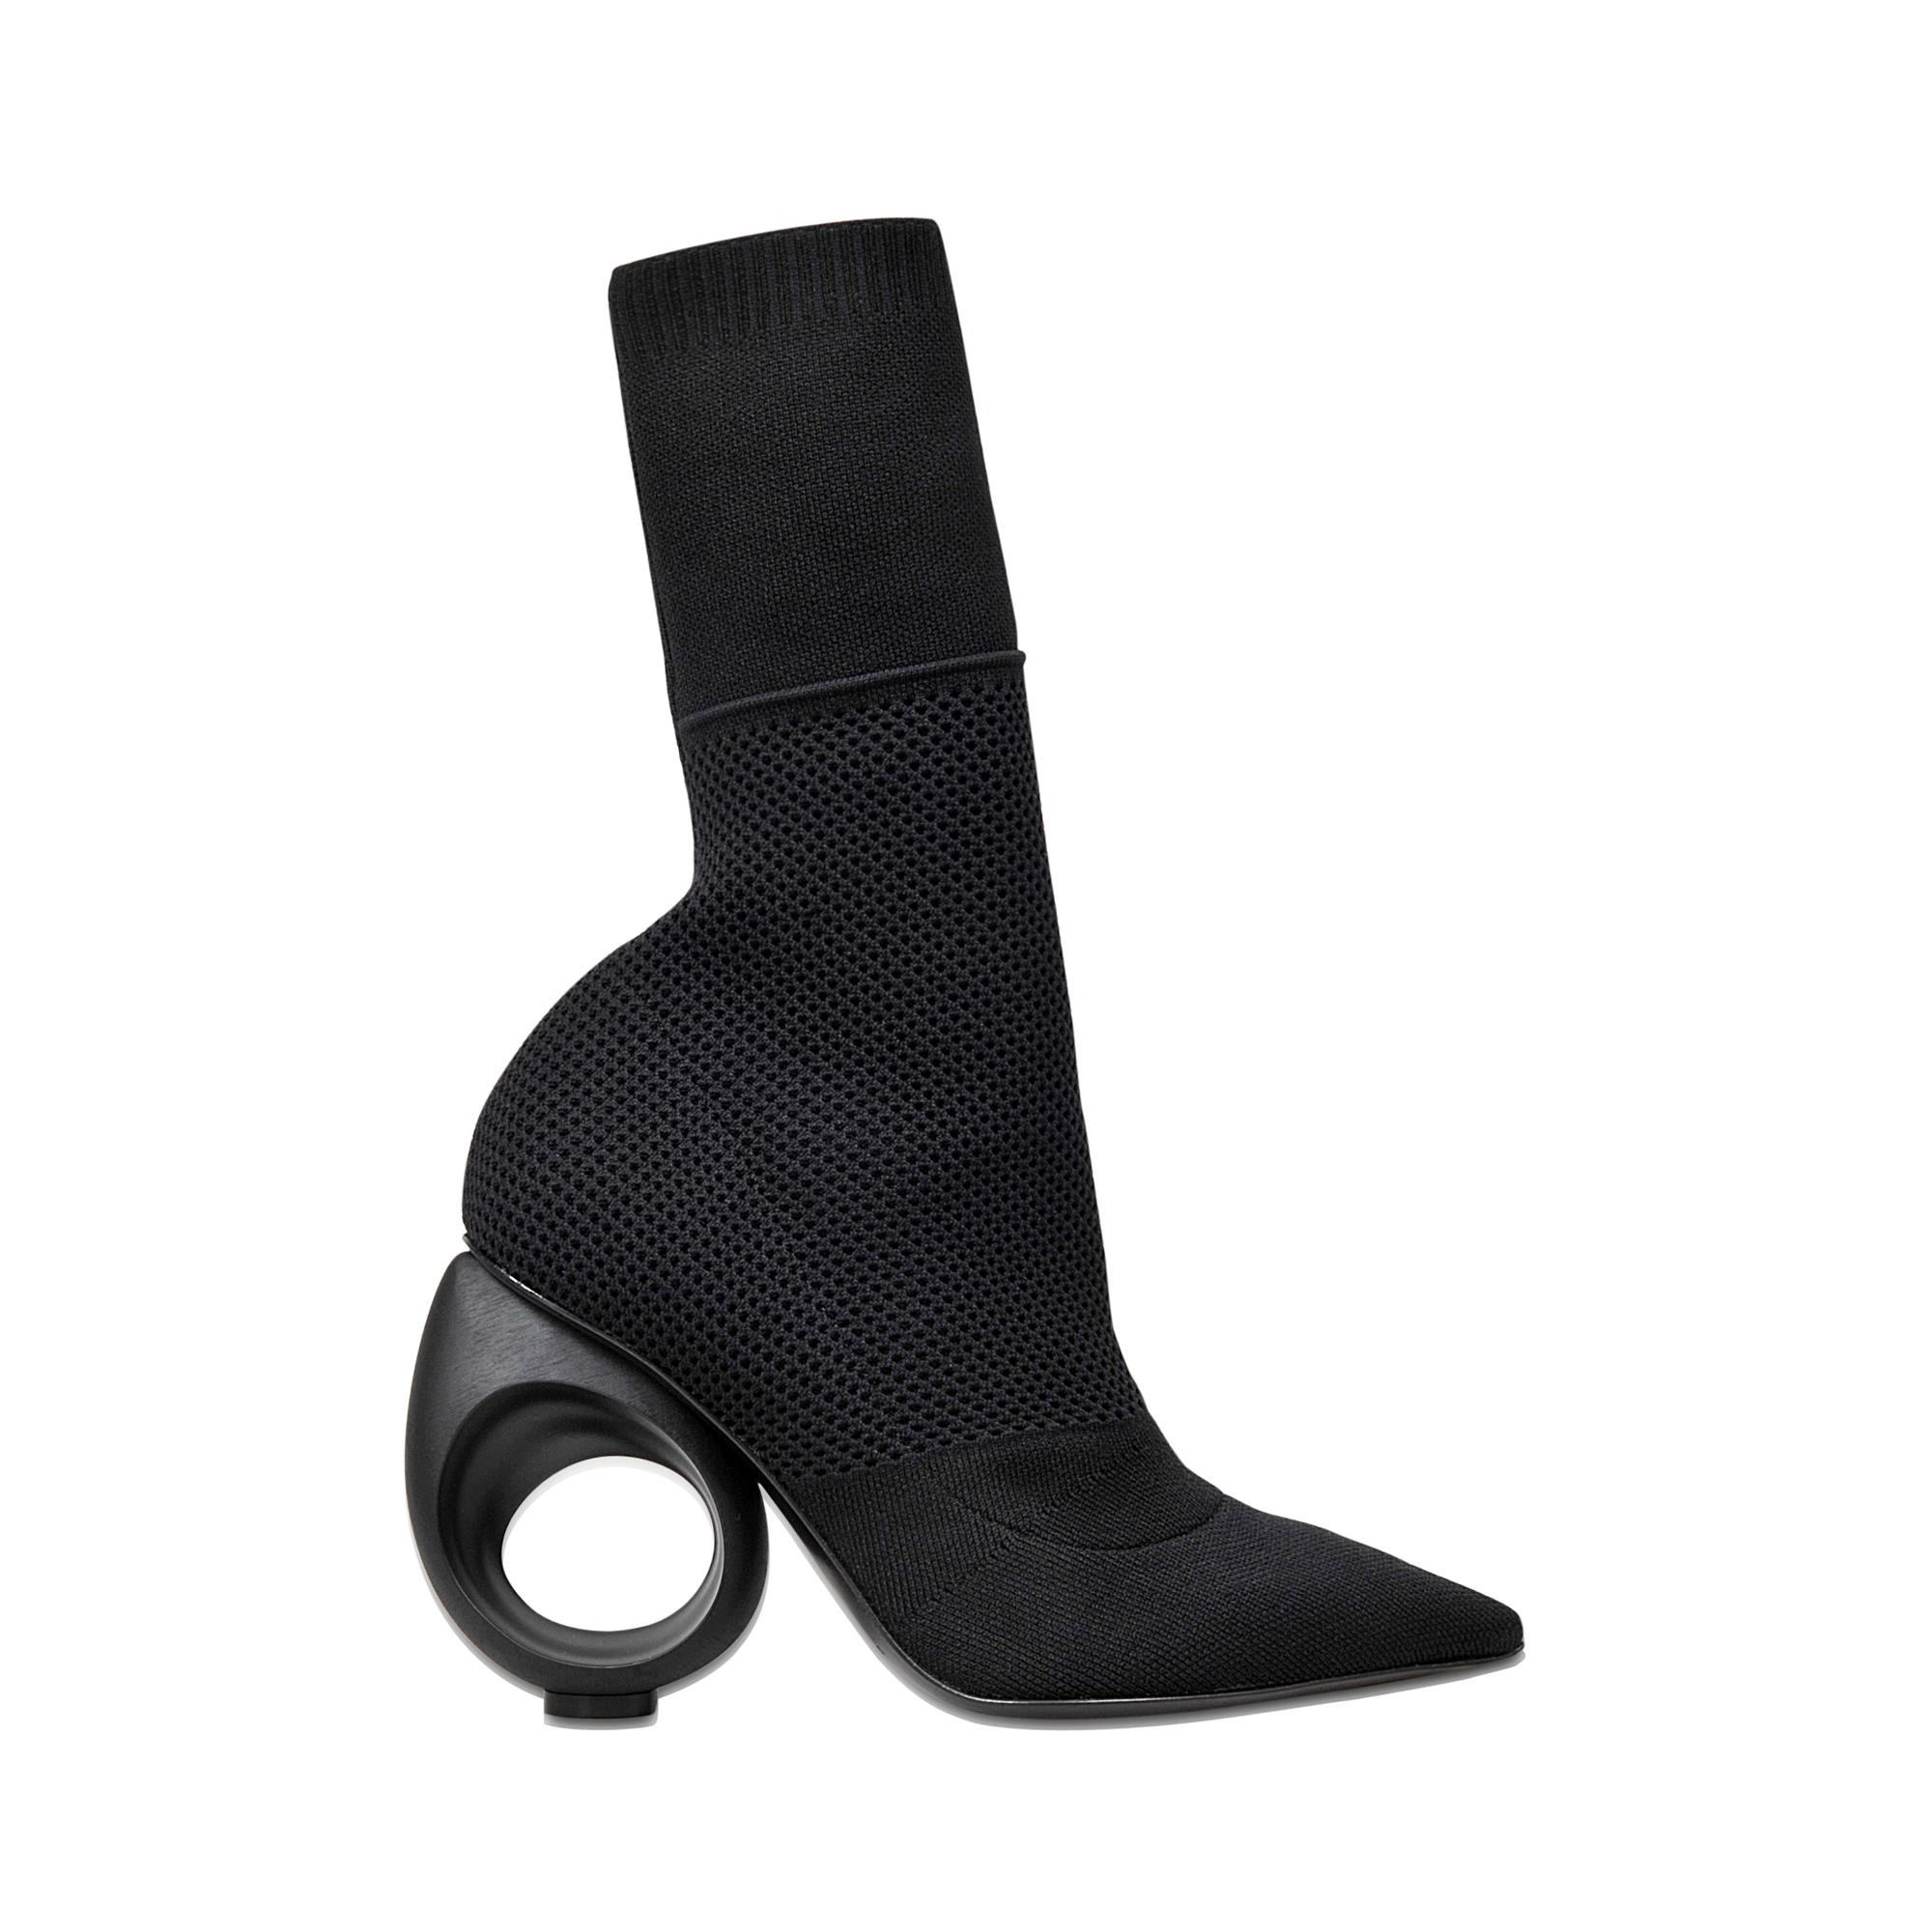 Chic and Sleek: Burberry Kimberly Boots